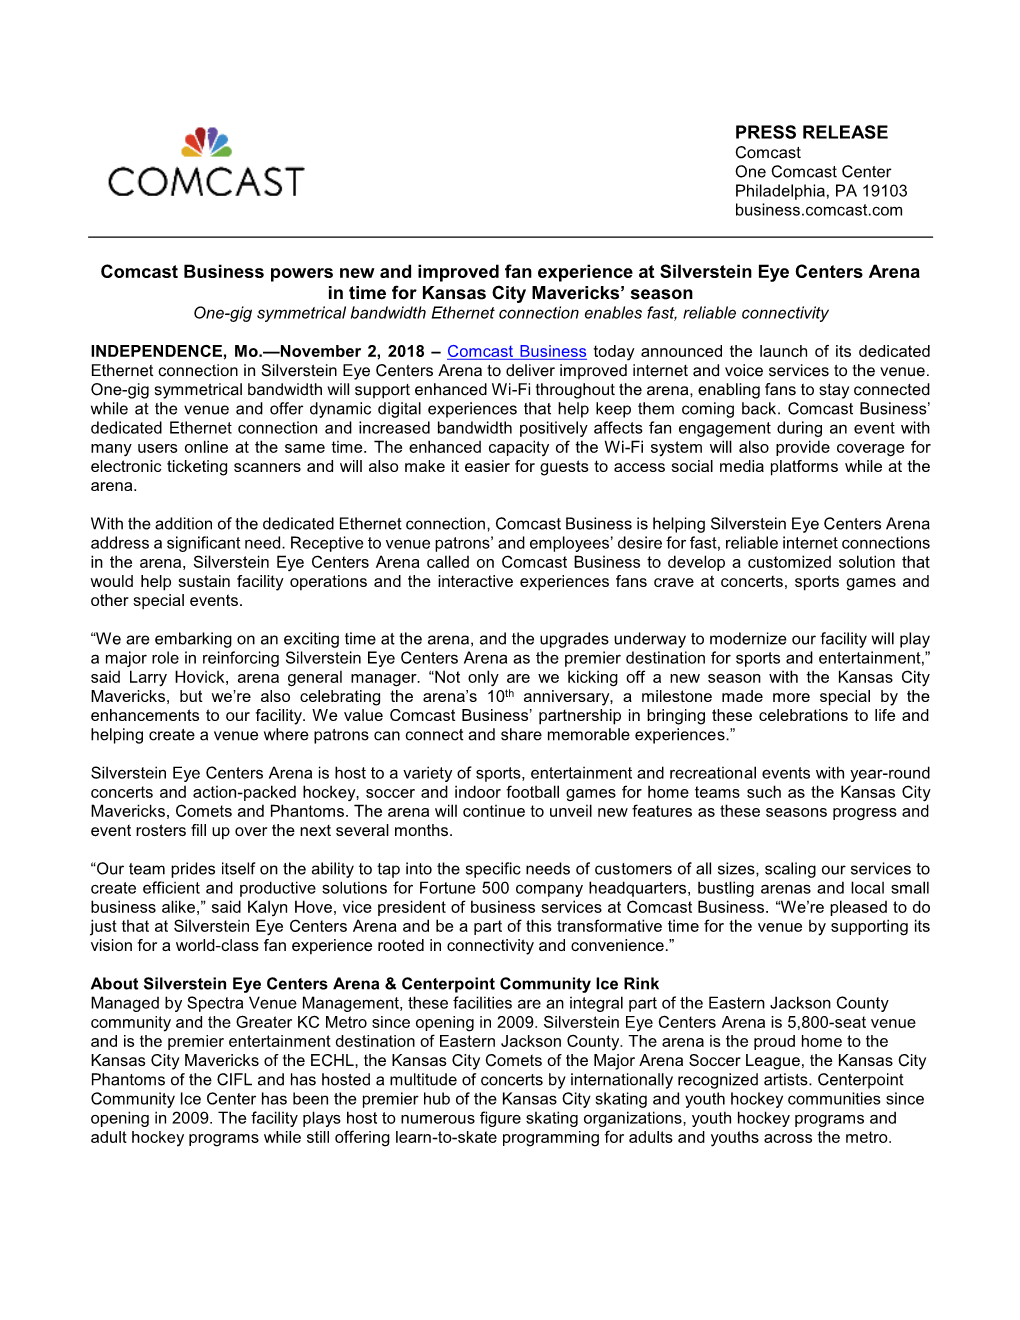 Comcast Business Powers New and Improved Fan Experience At